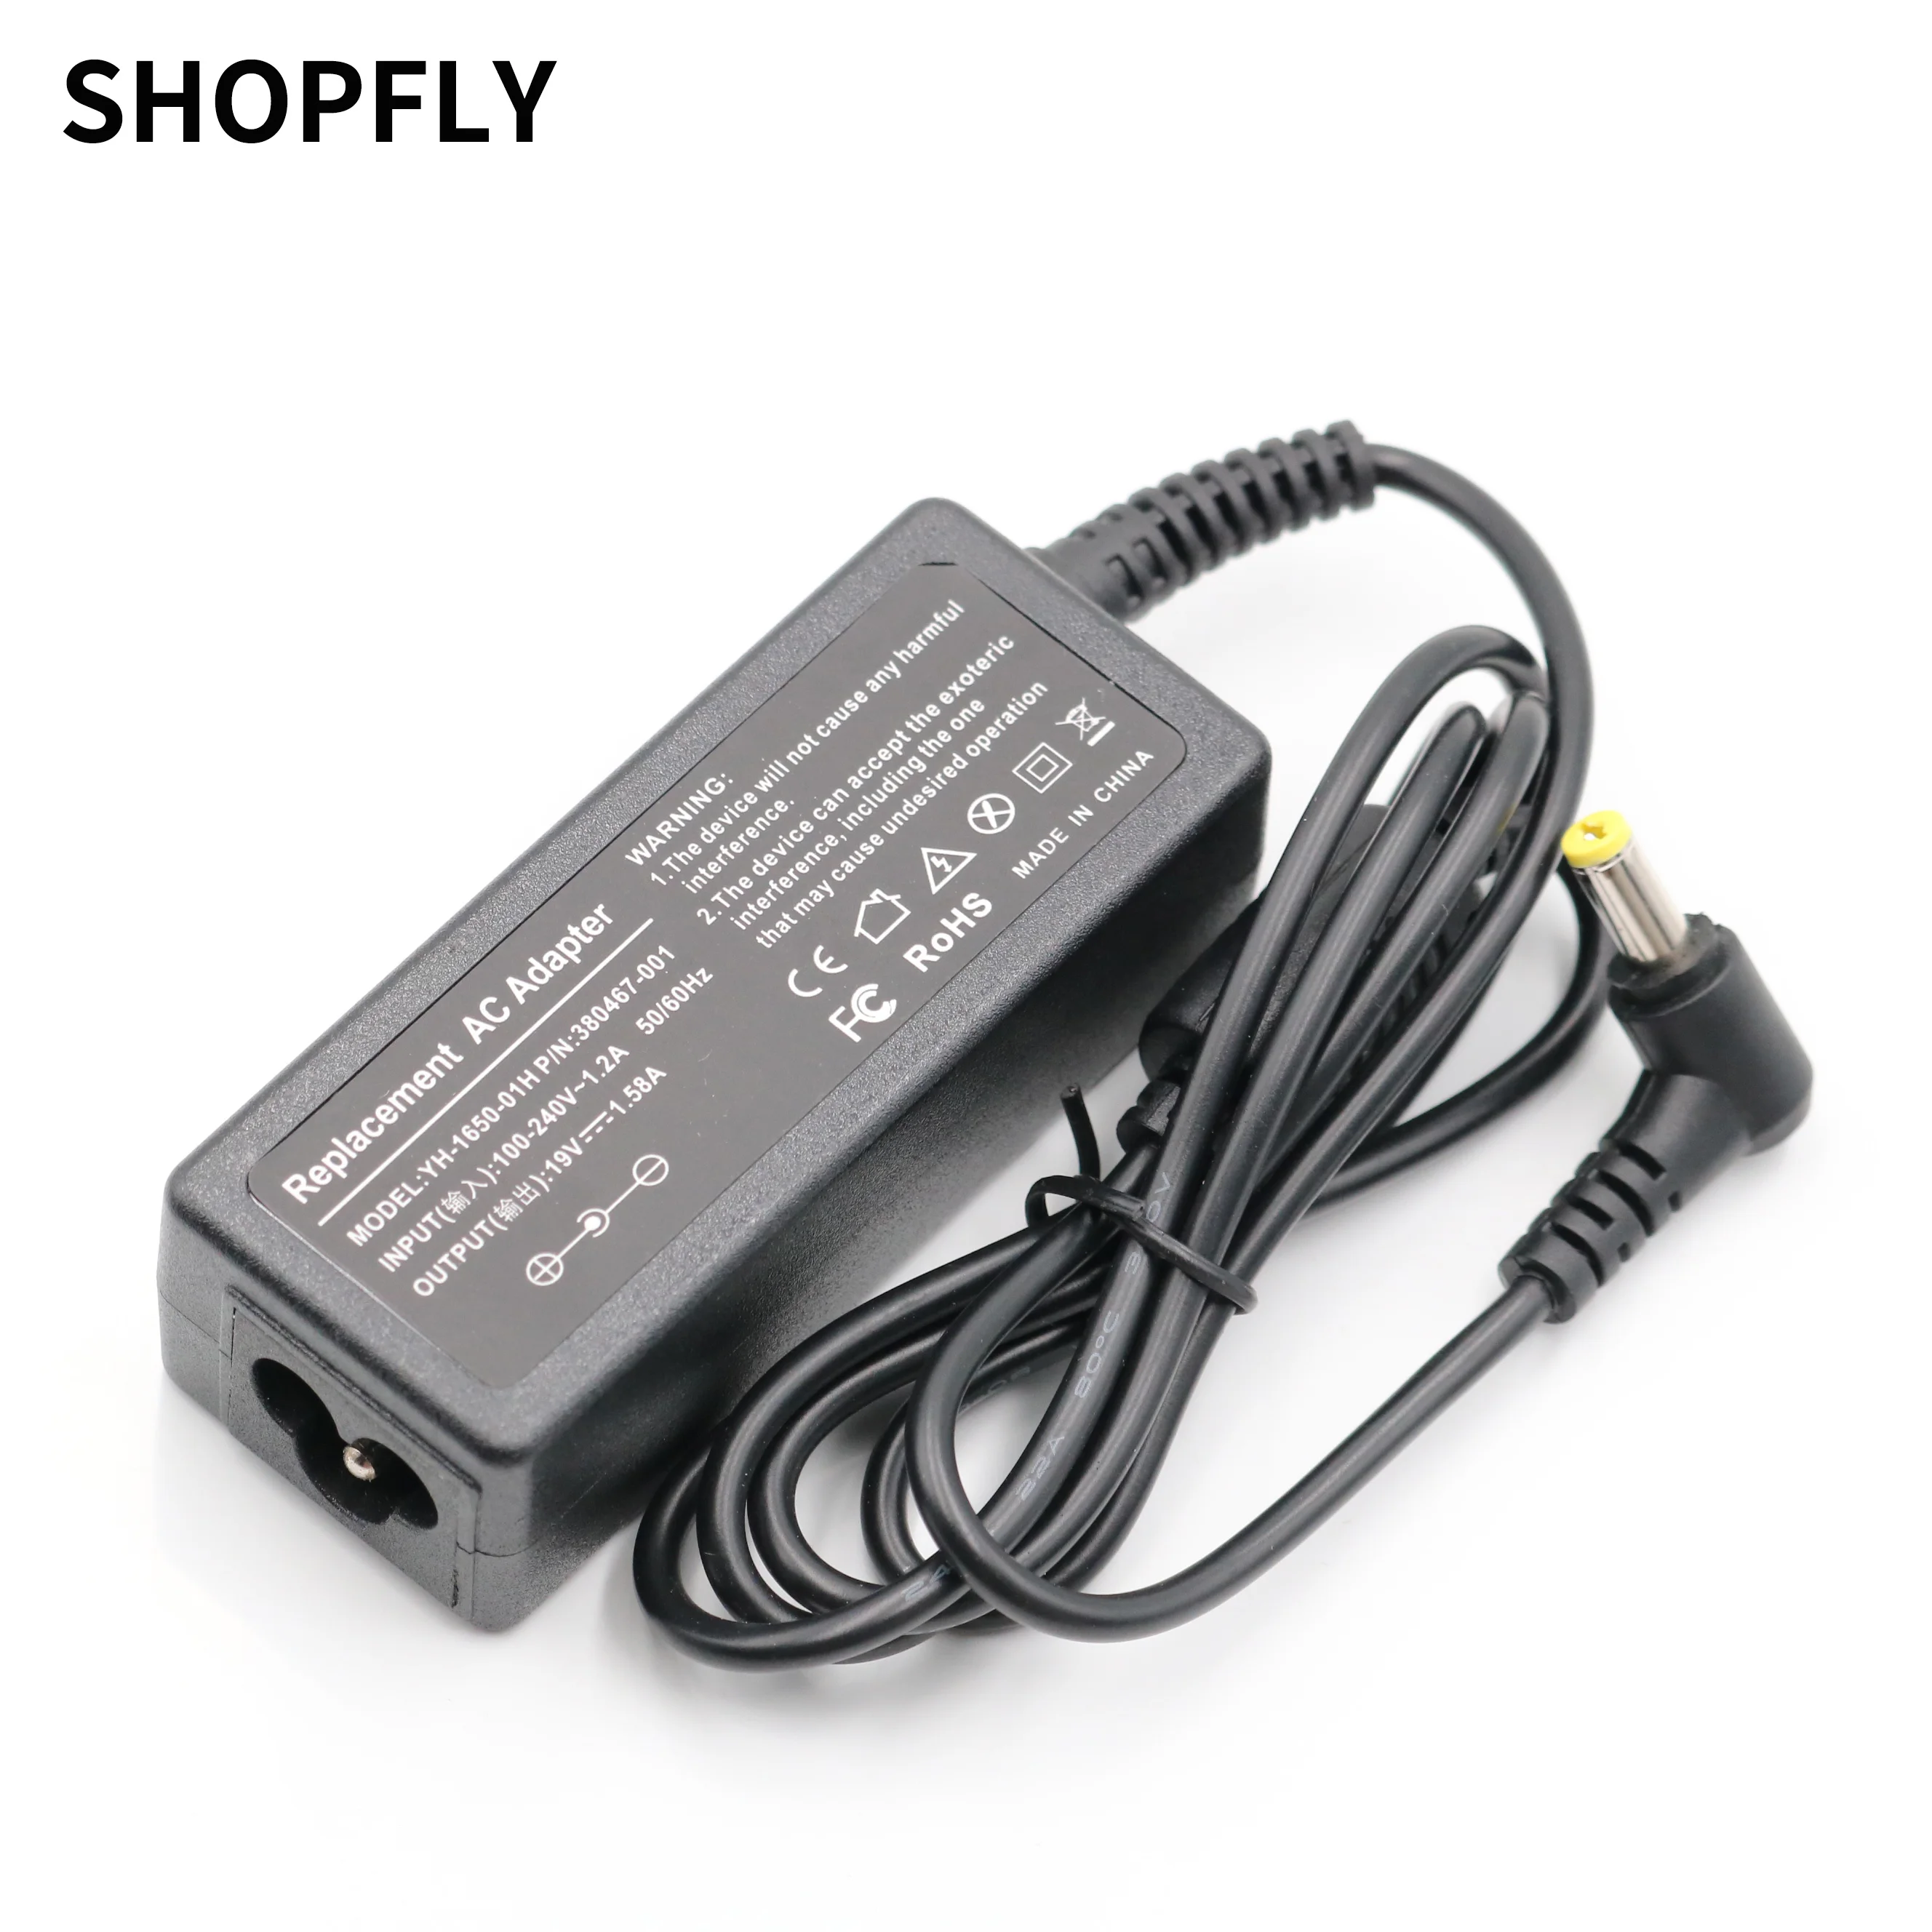 

19V 1.58A 5.5*1.7mm For Acer Aspire One Power Supply For Laptop Notepads Laptops Netbook Power Adapter Charger